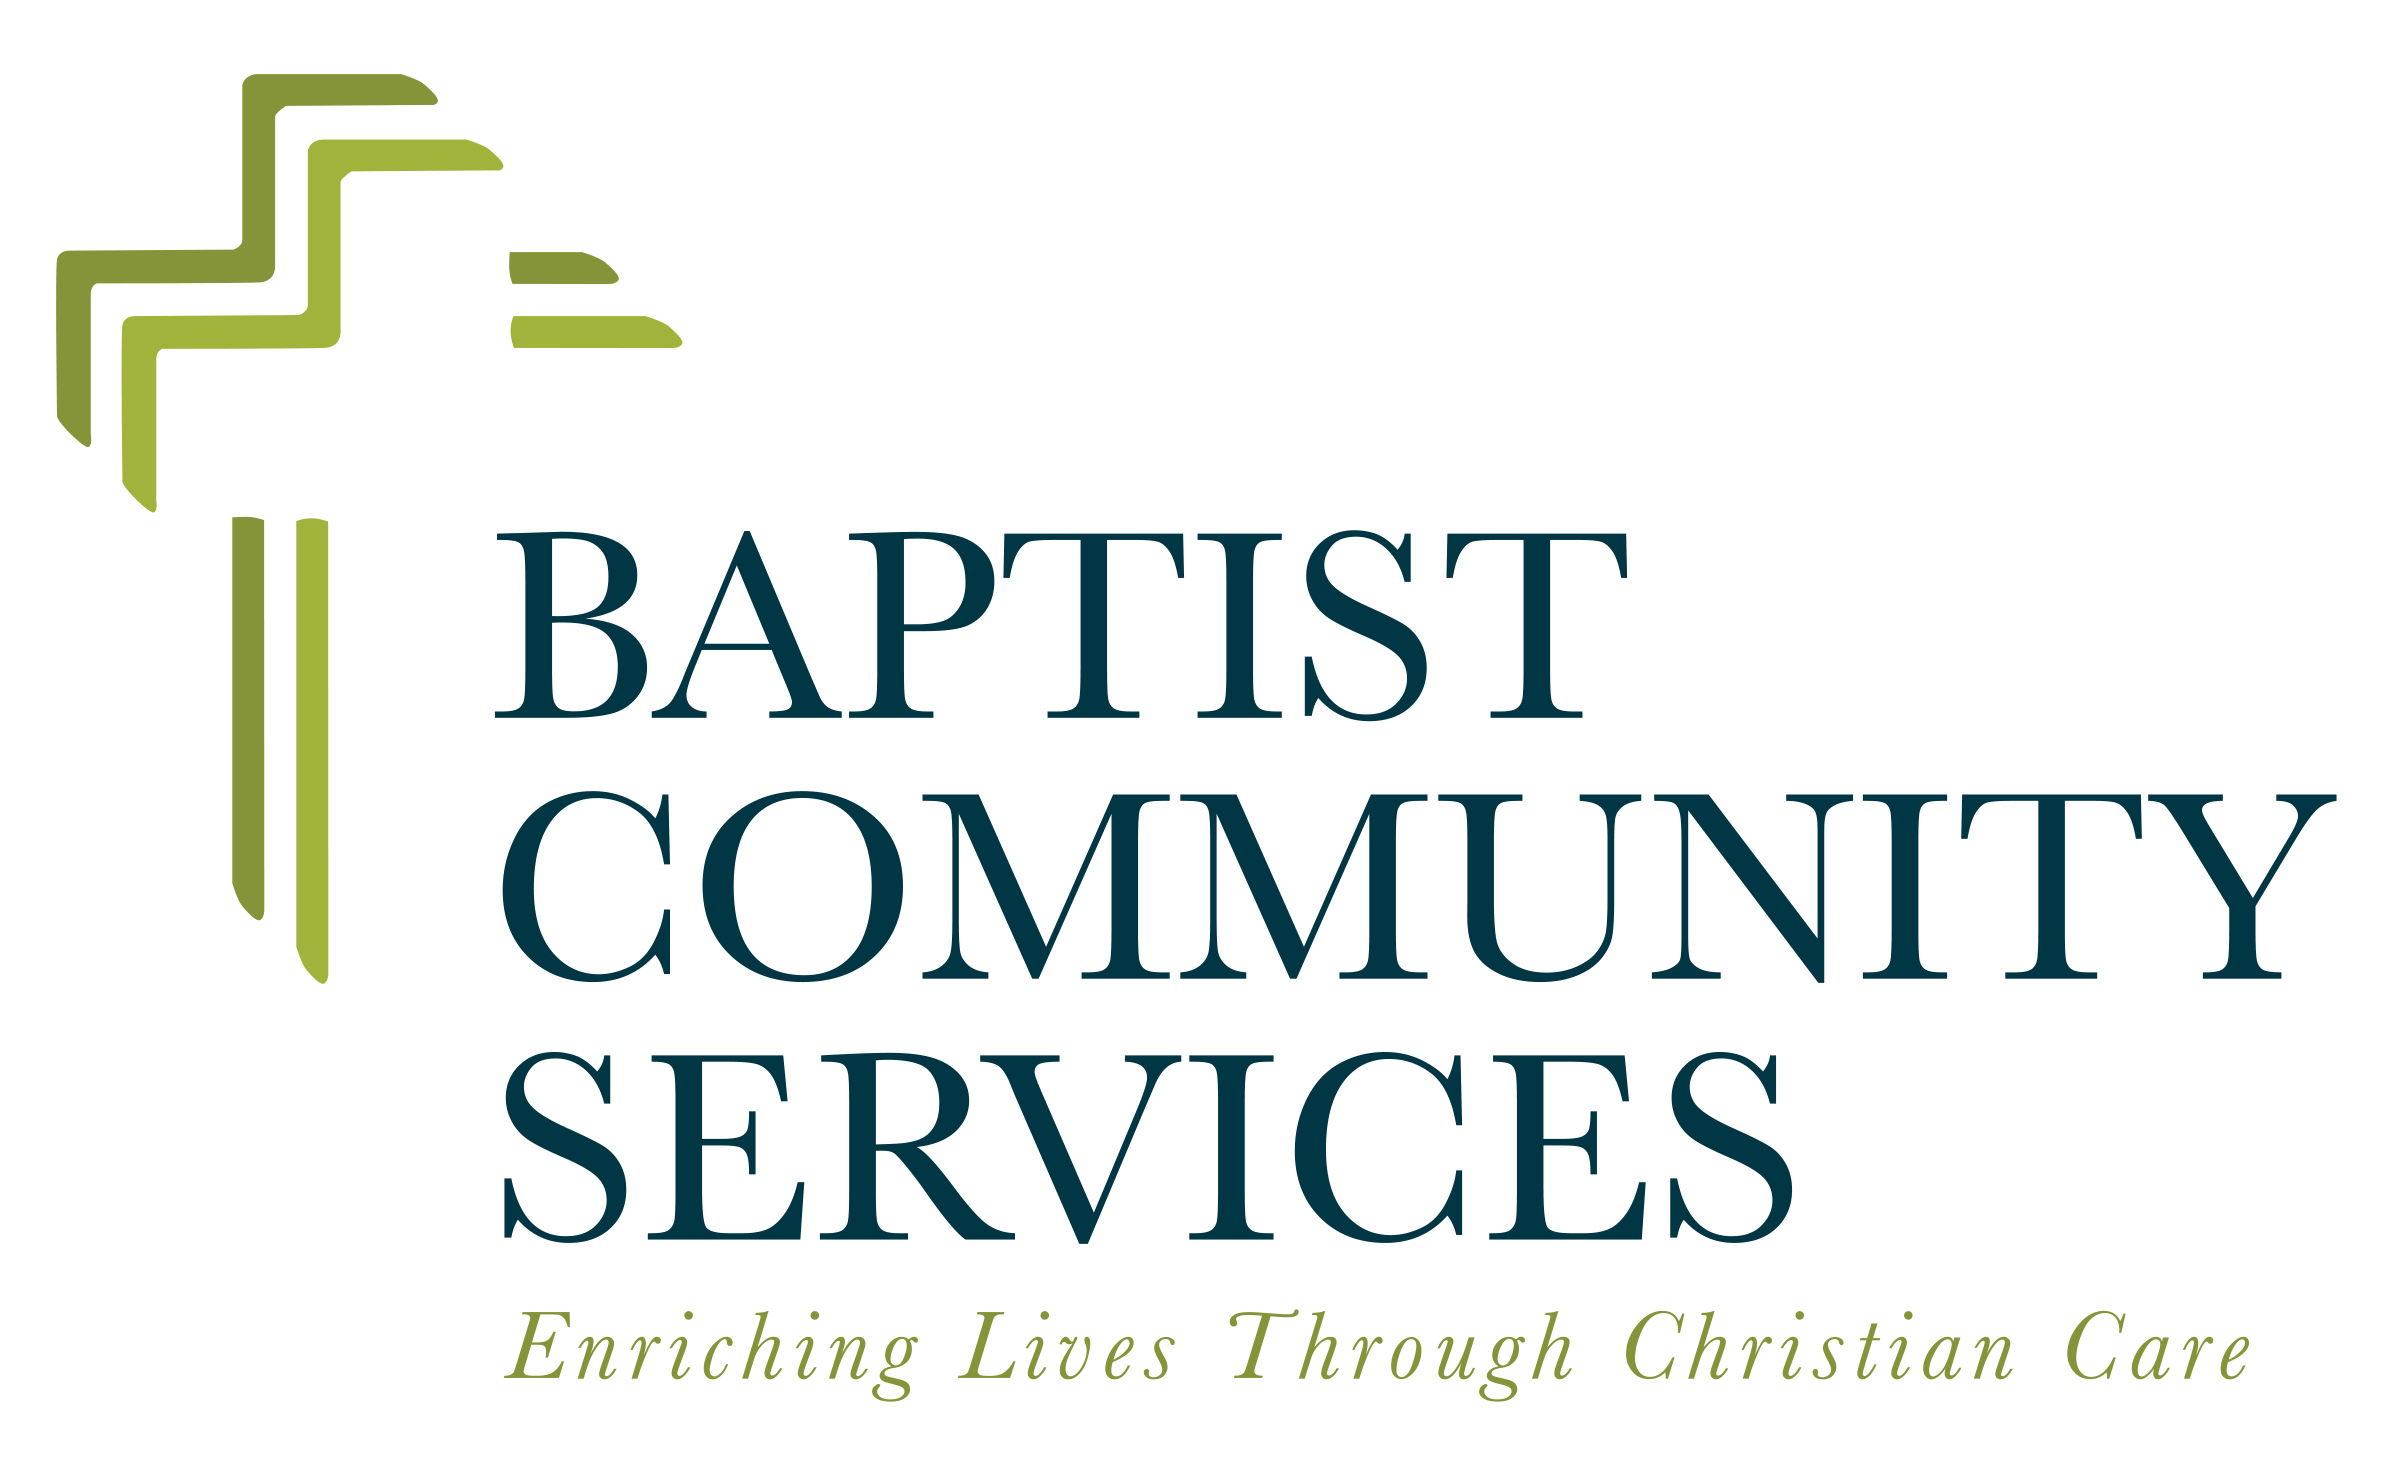 A.Baptist Community Services (Presenting)